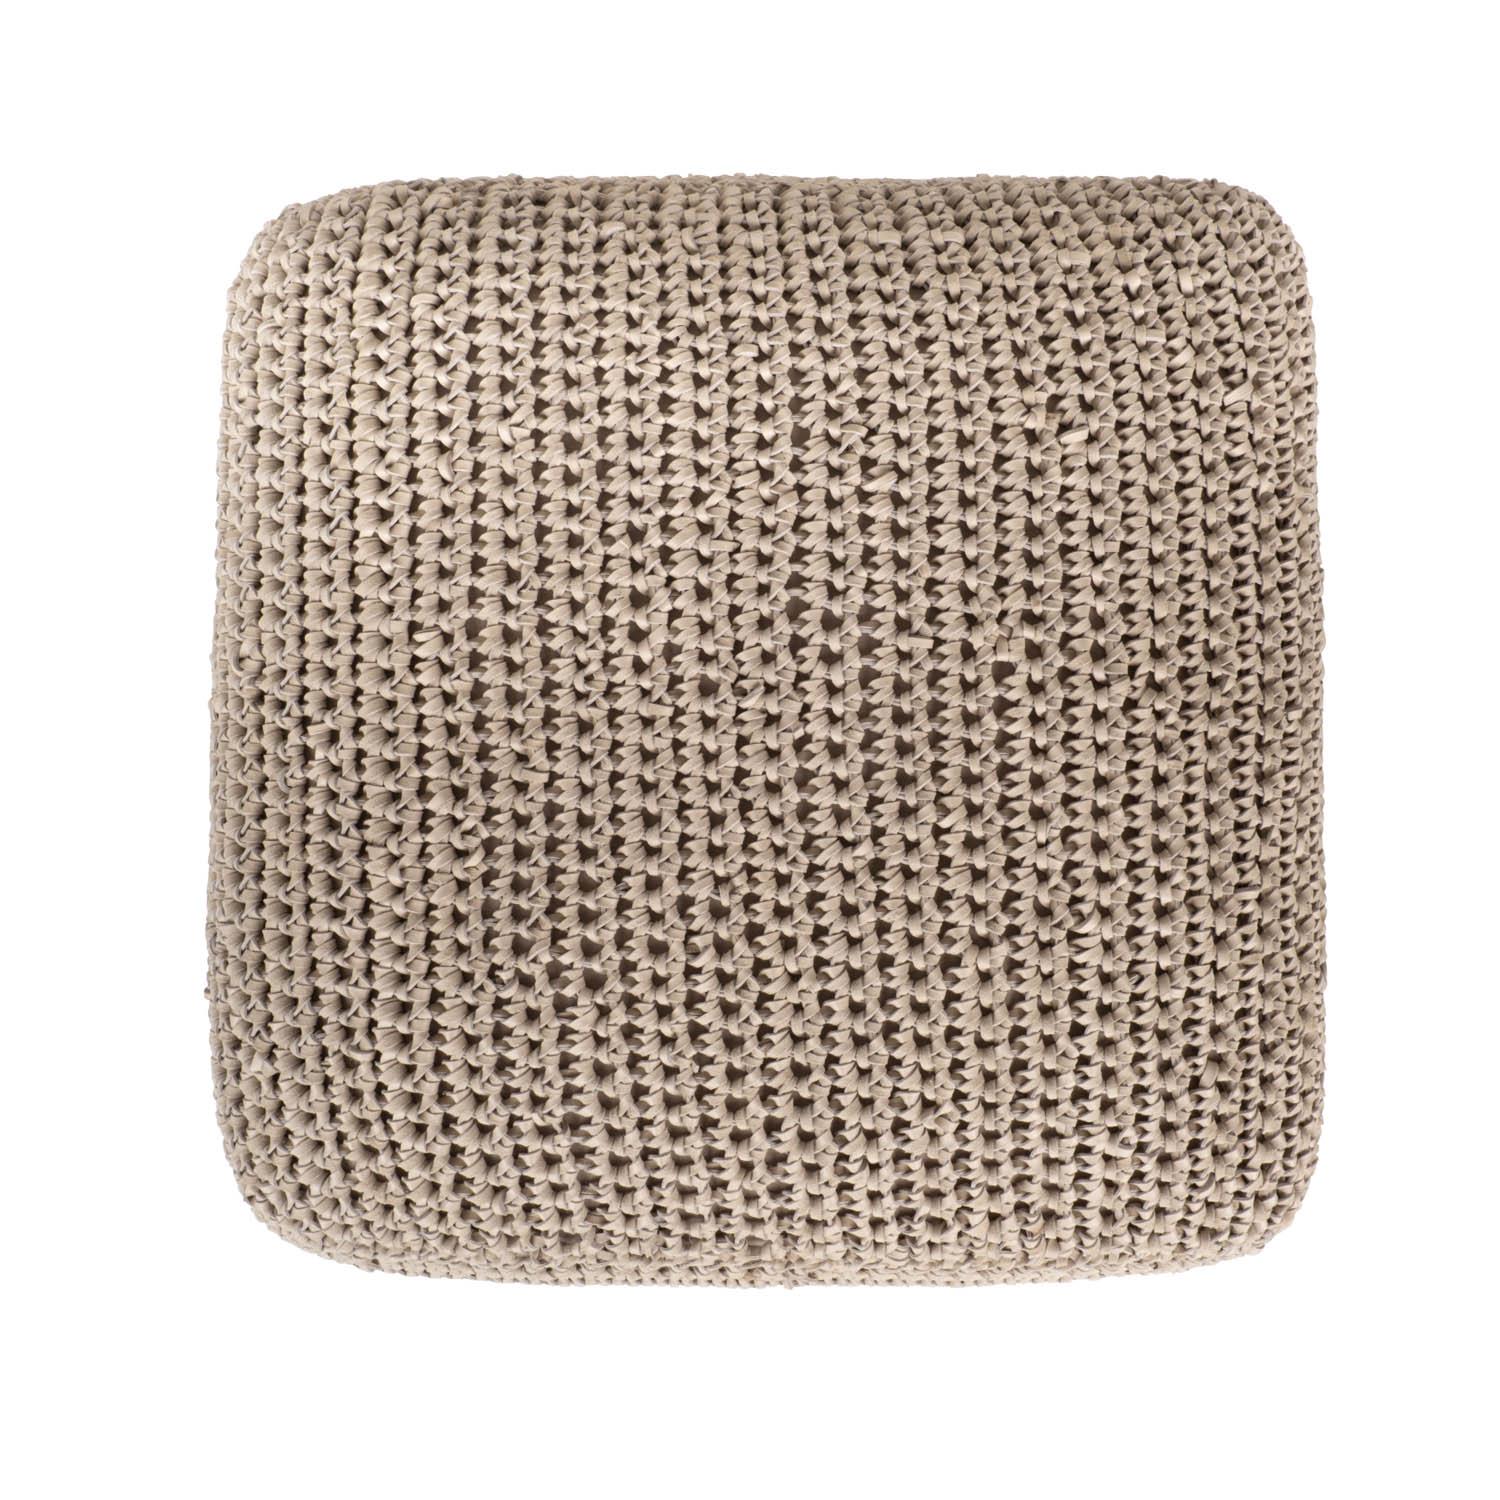 Crocheted Leather Cube Ottoman